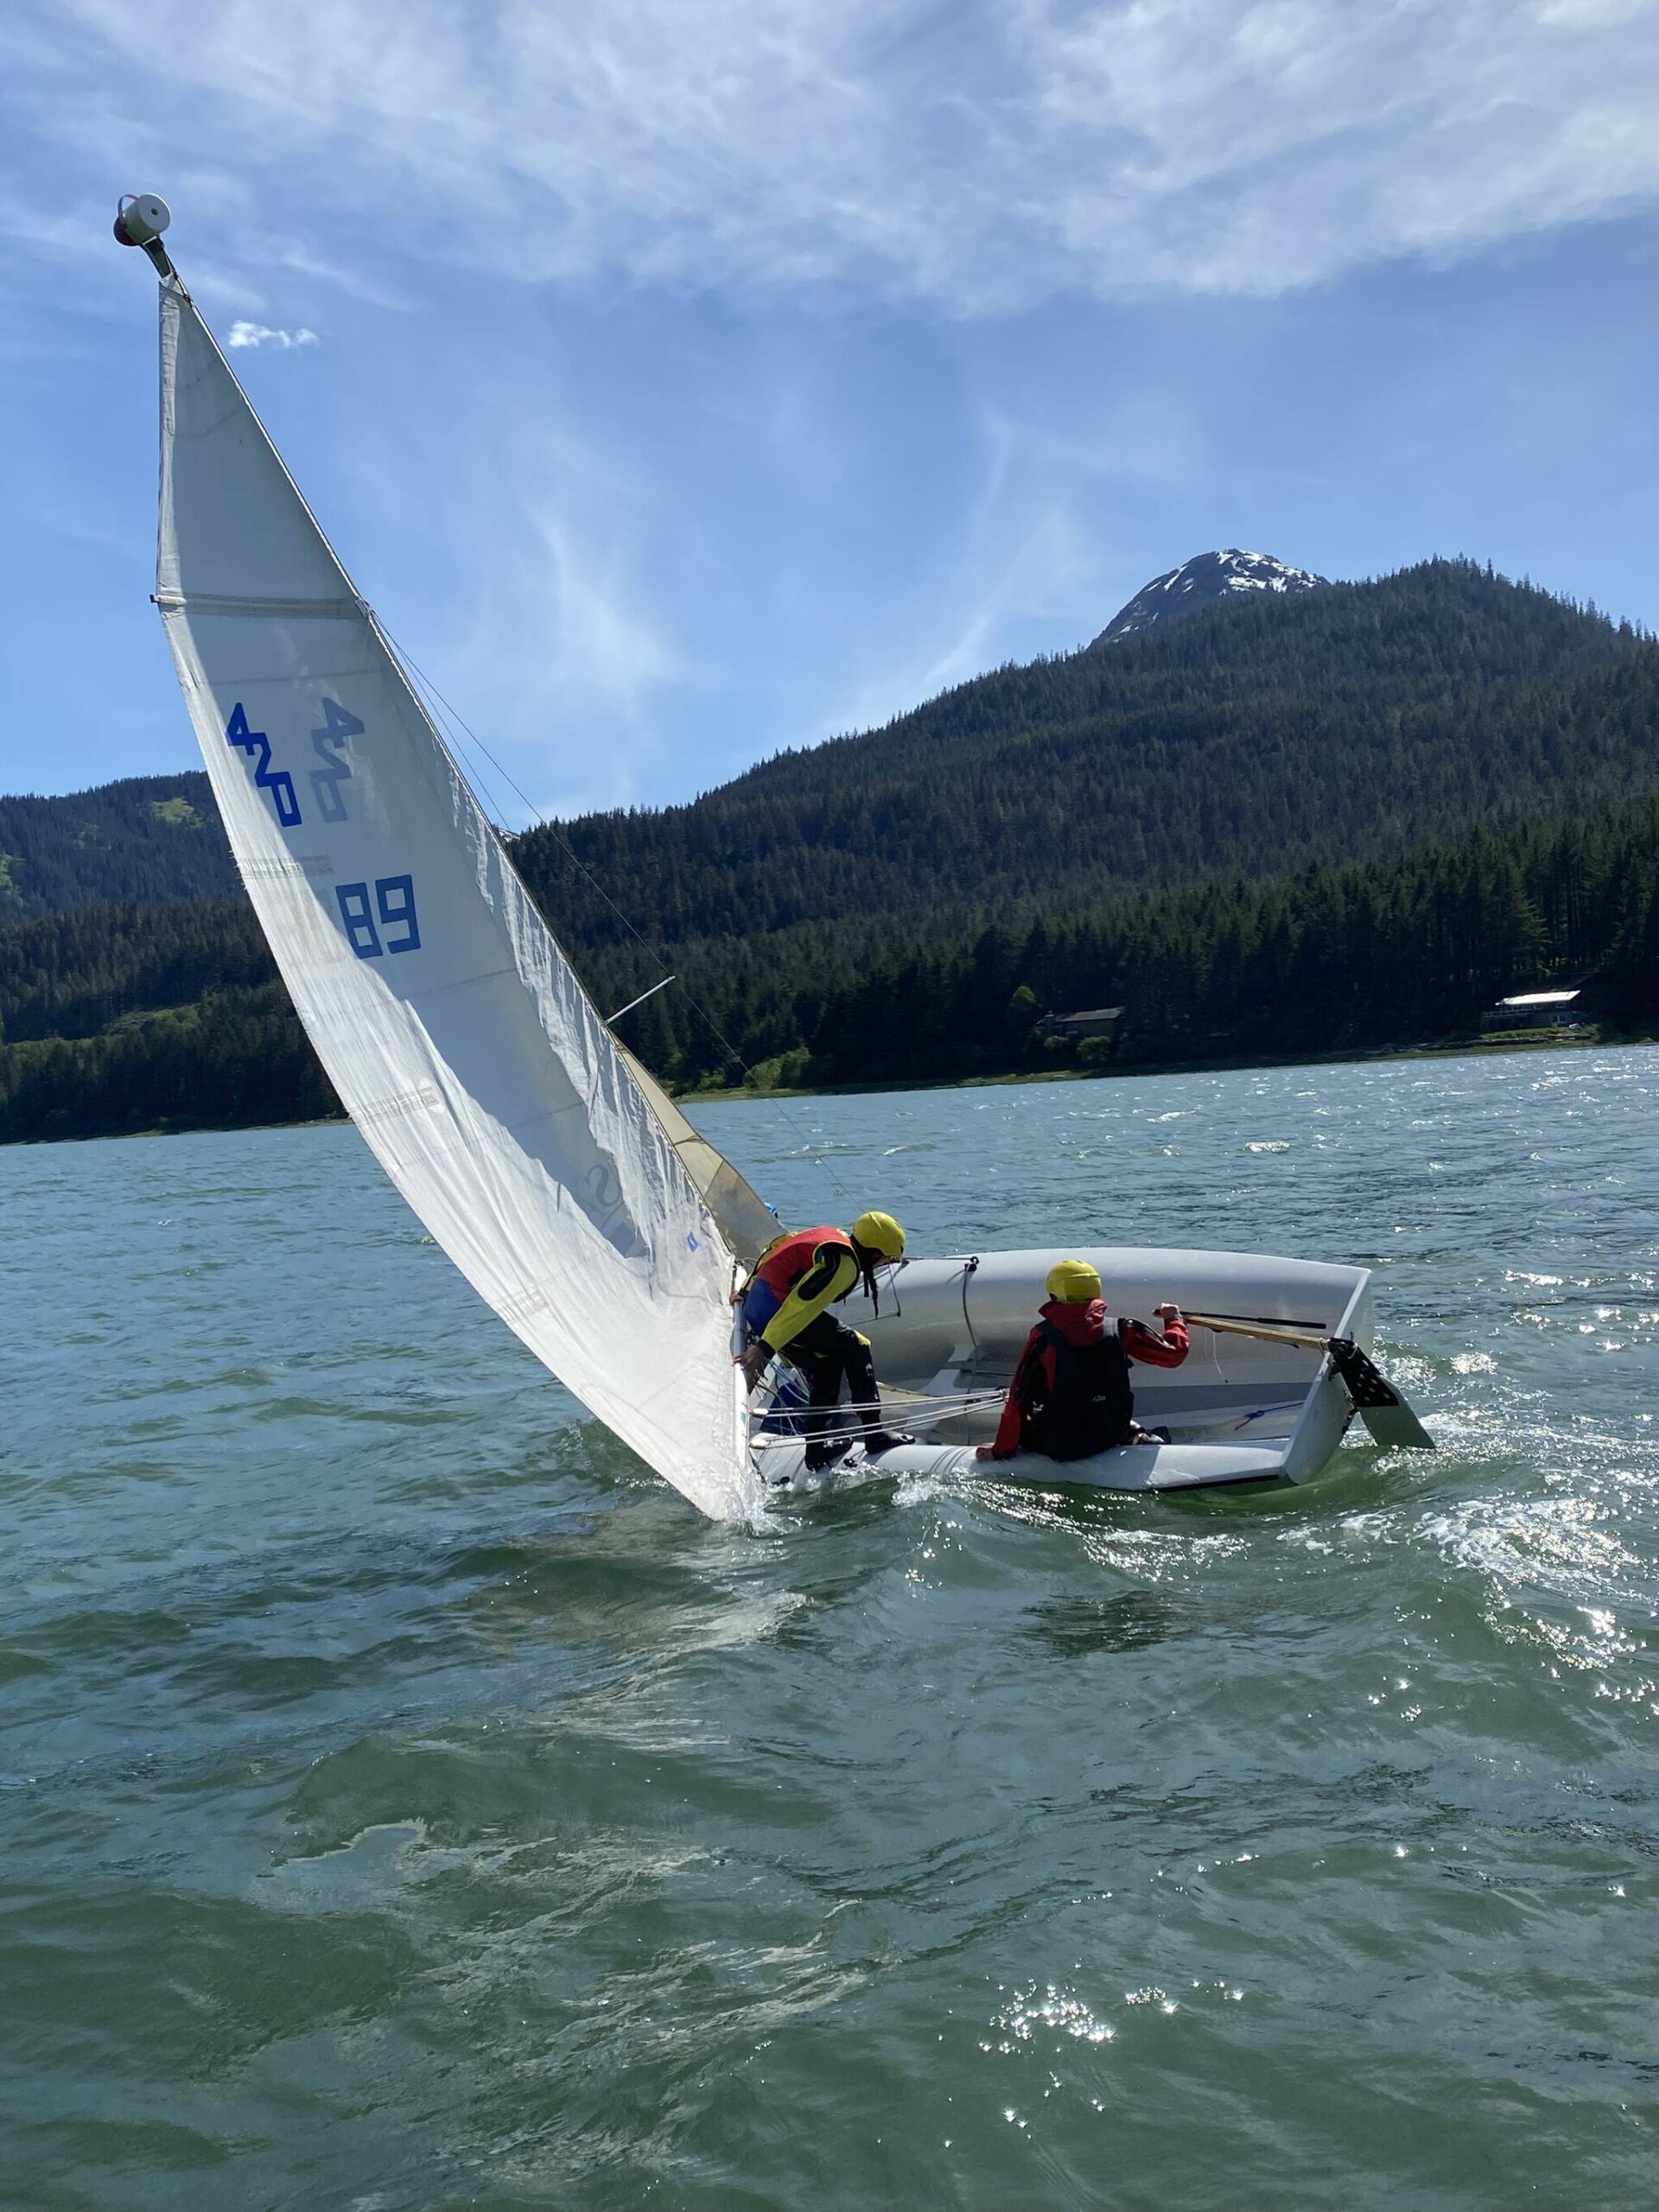 Lua Mangaccat, 15, and Jack Adams, 15, try right their boat during a Juneau Youth Sailing course this week. (Photo by Adrian Whitney)